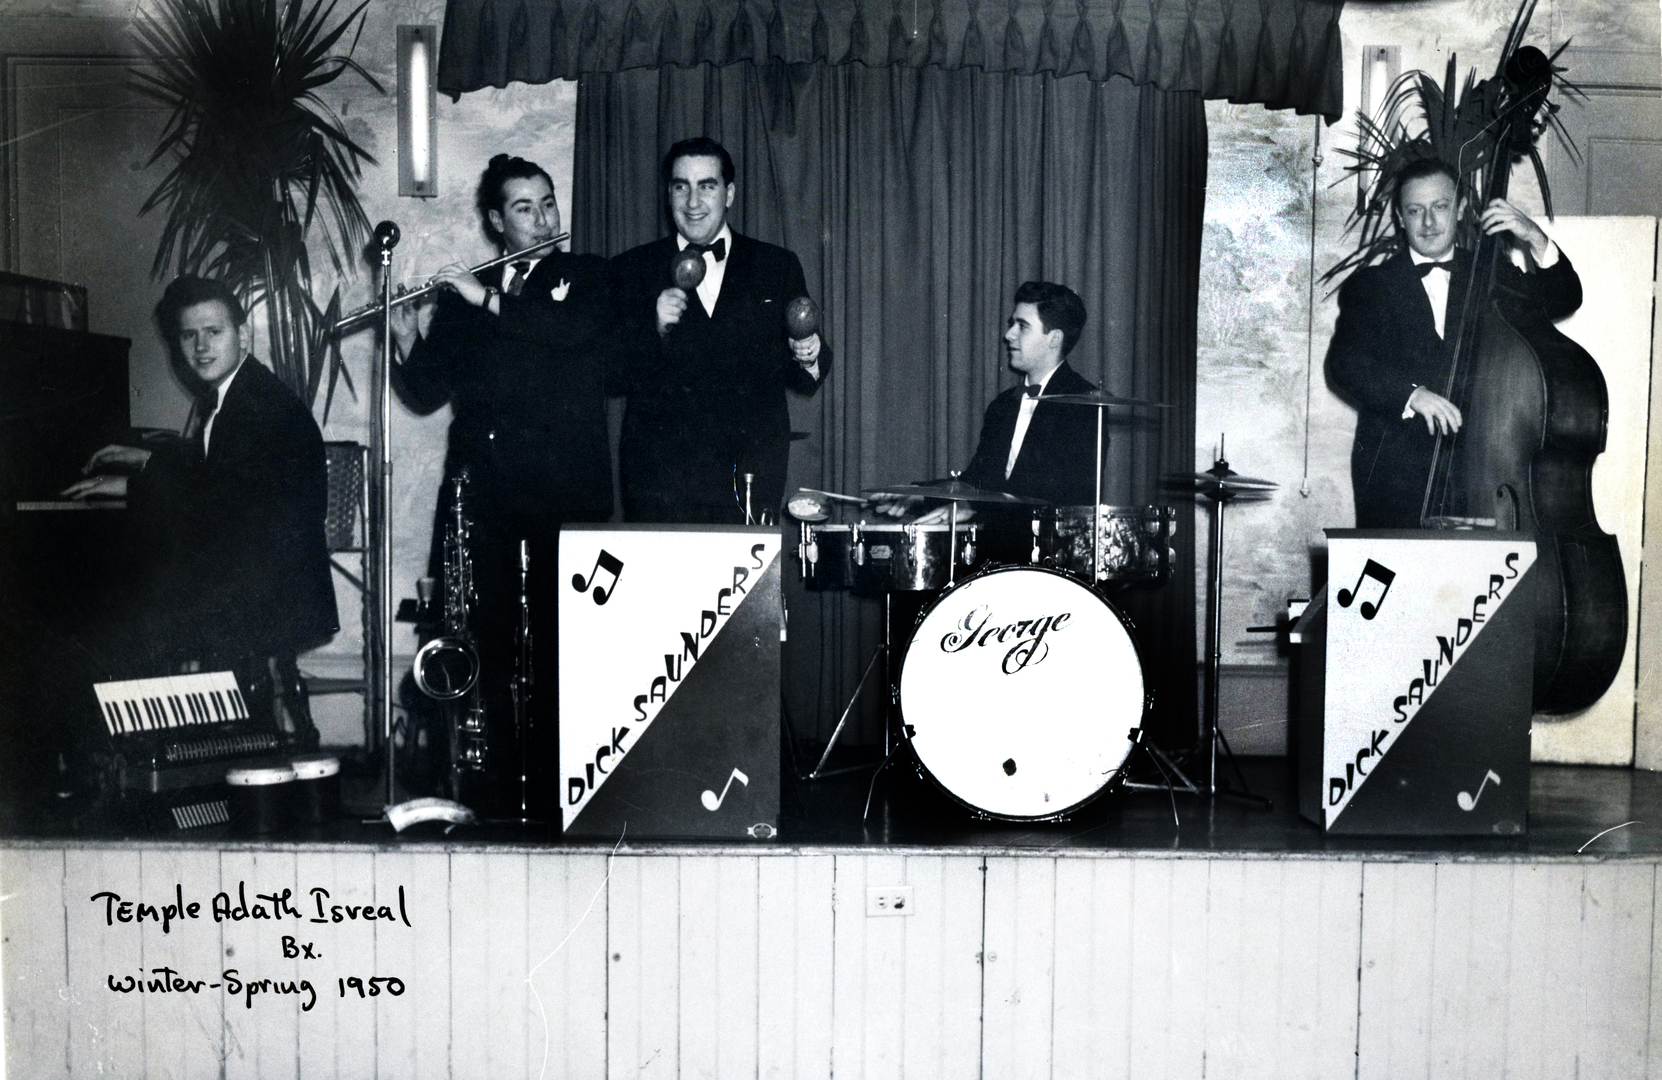 Dick Saunders band performing at a show